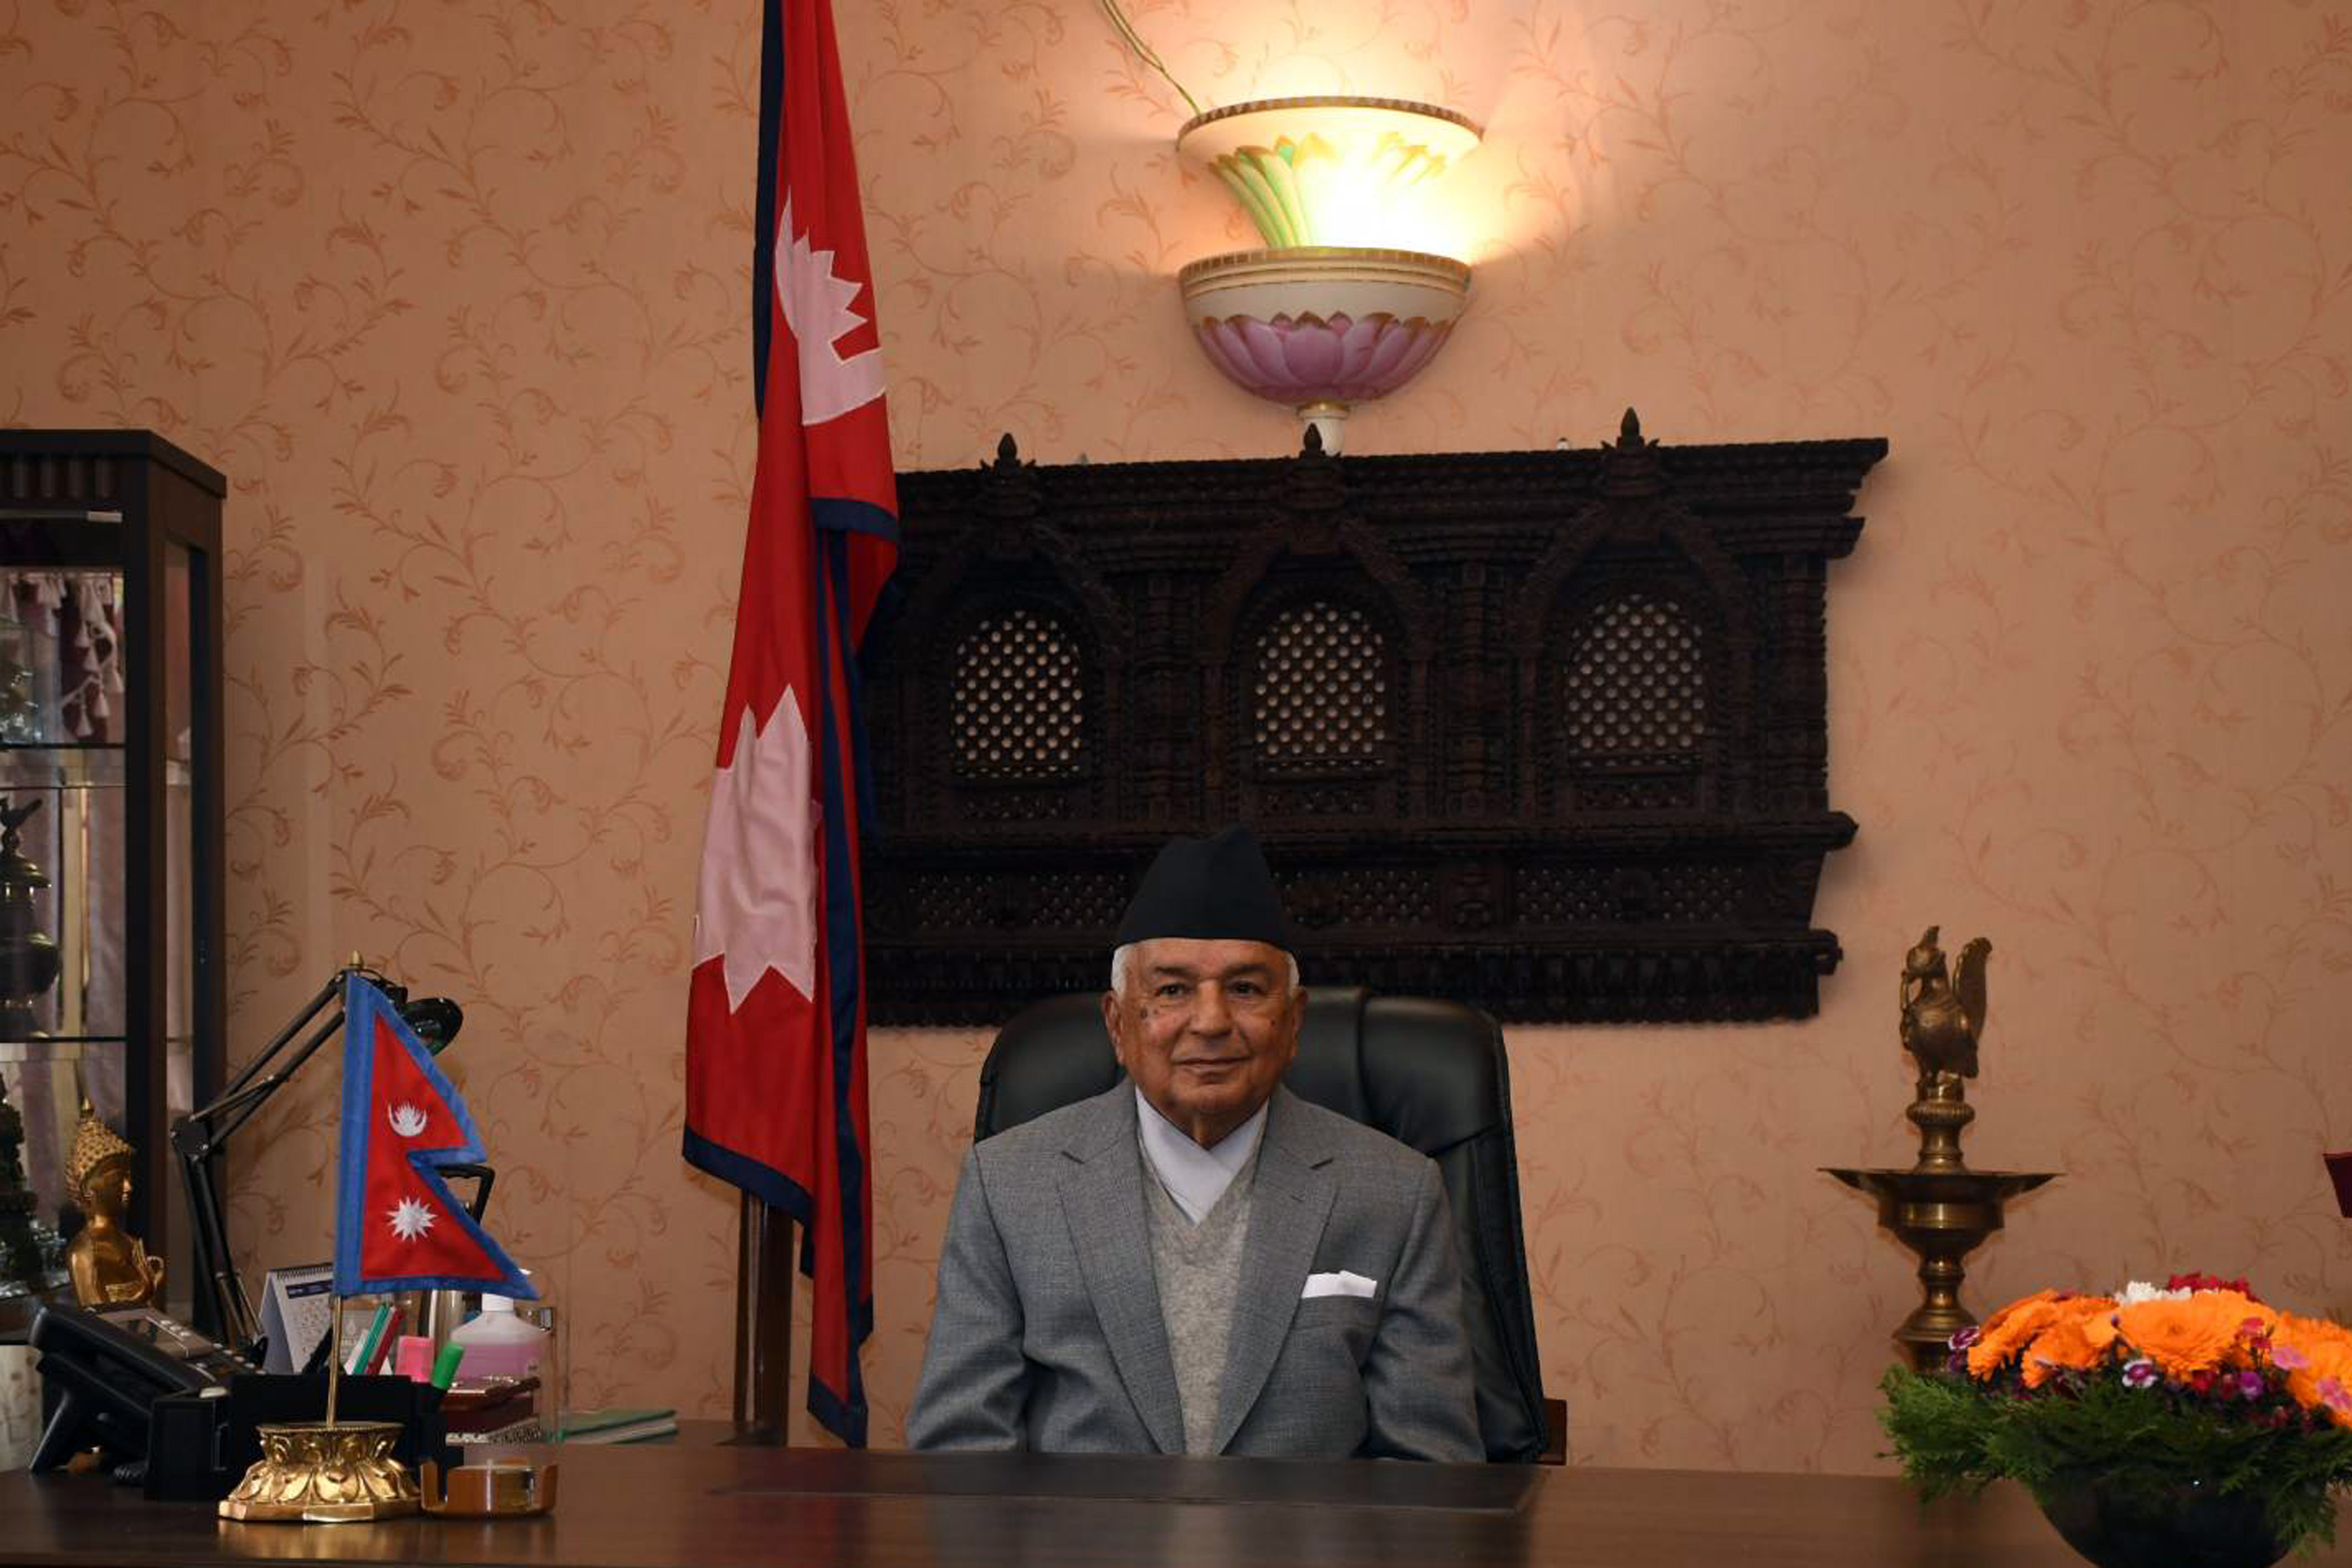 General public should be assured with social security: President Paudel